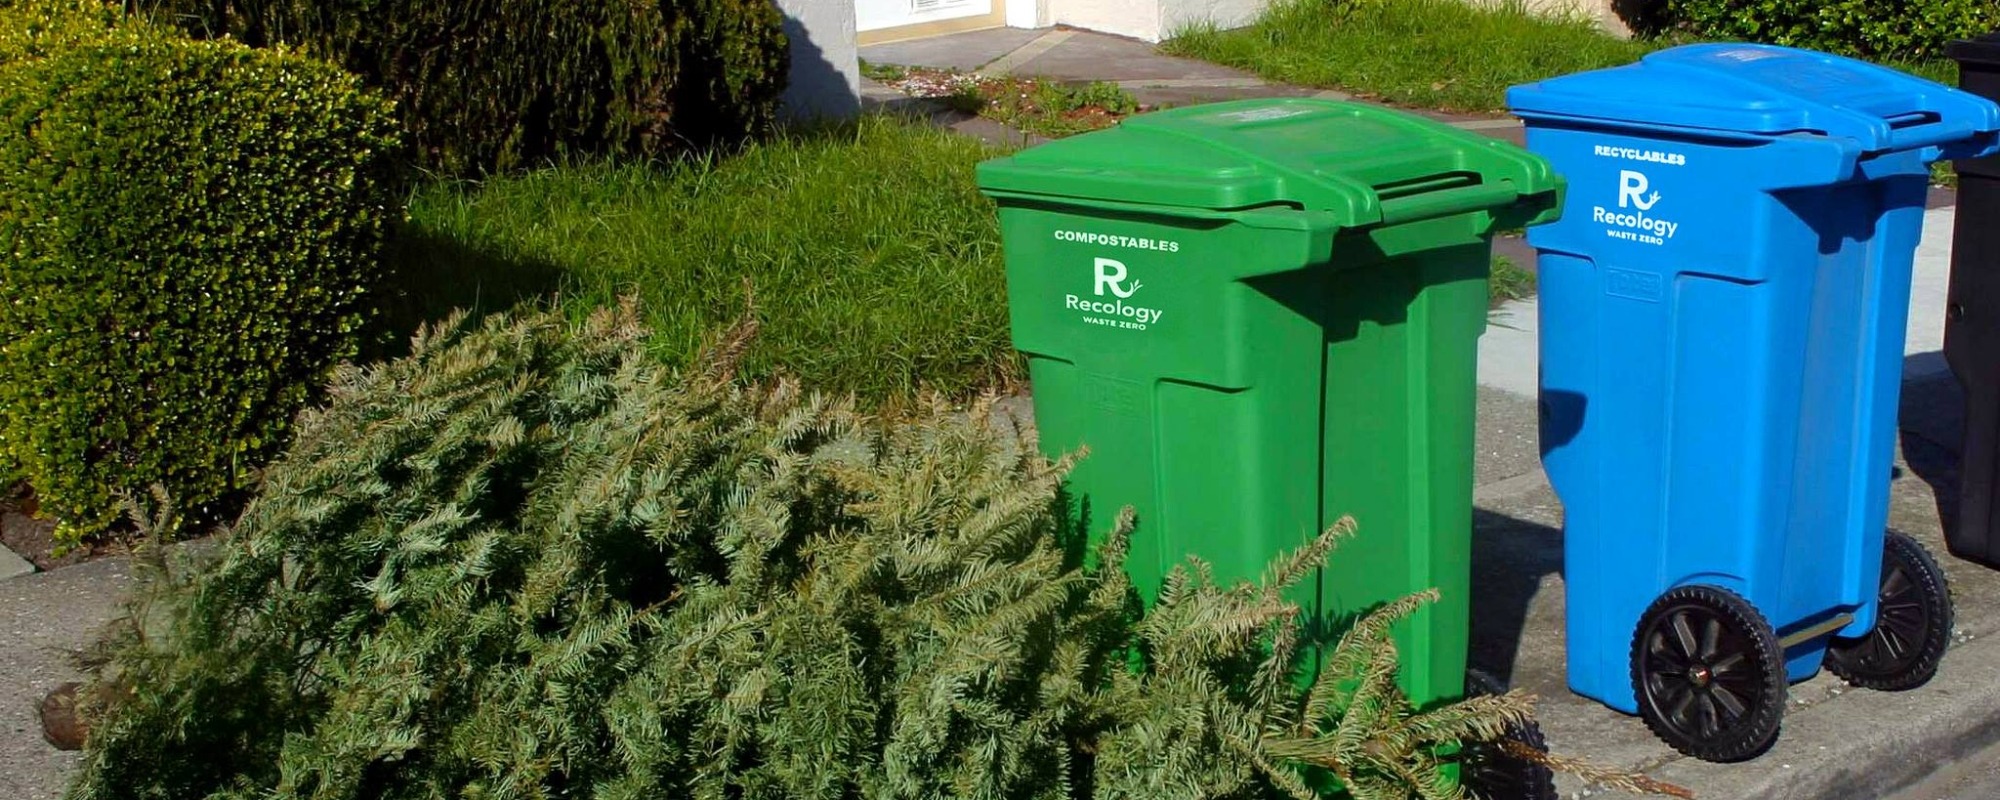 A Christmas tree set to be treecylced lies next to two Recology bins.